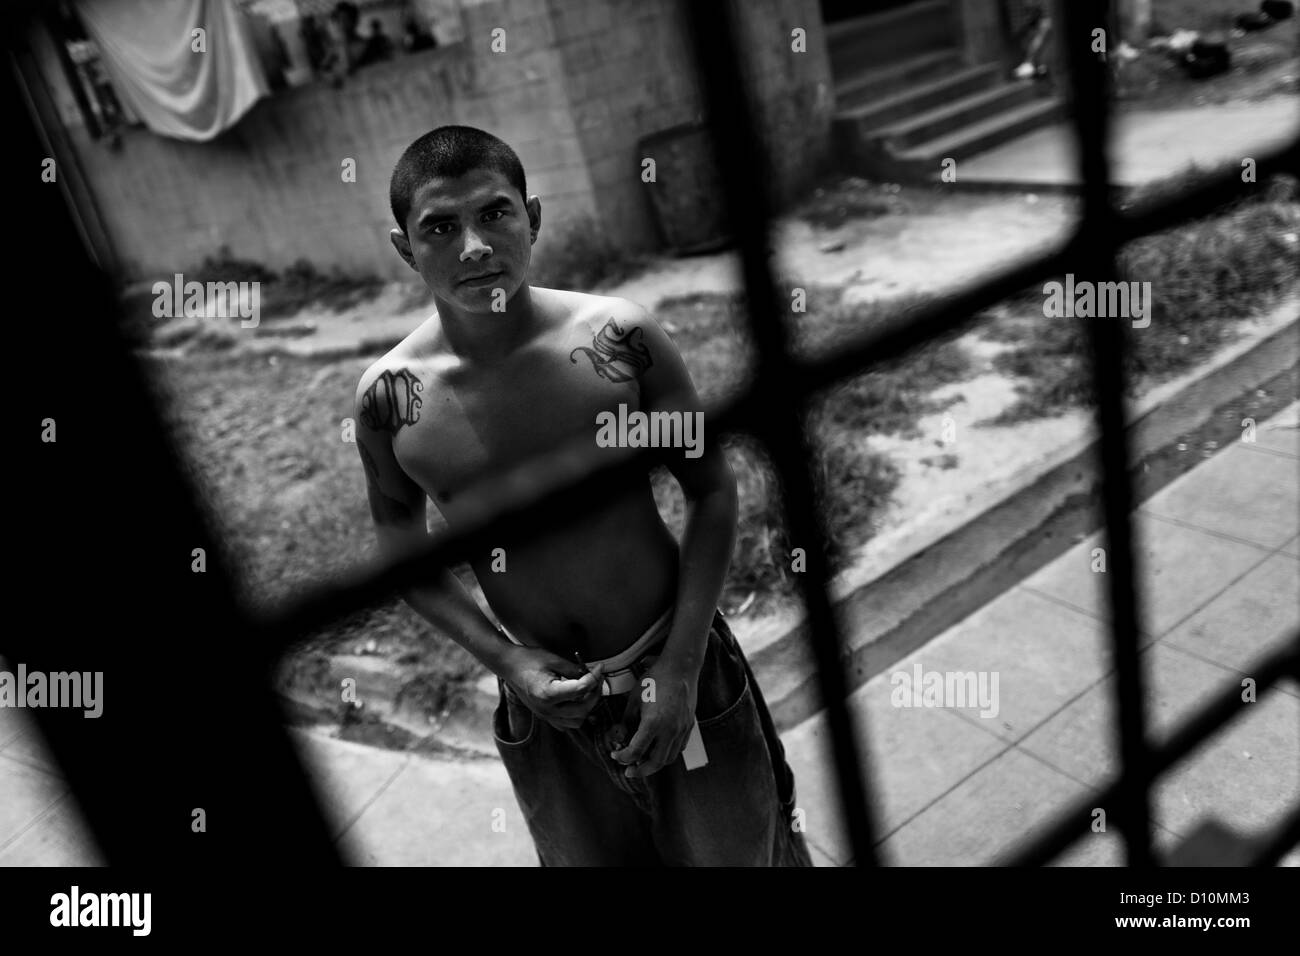 A member of the Mara Salvatrucha gang (MS-13) stands behind the bars in the prison of Tonacatepeque, El Salvador. Stock Photo